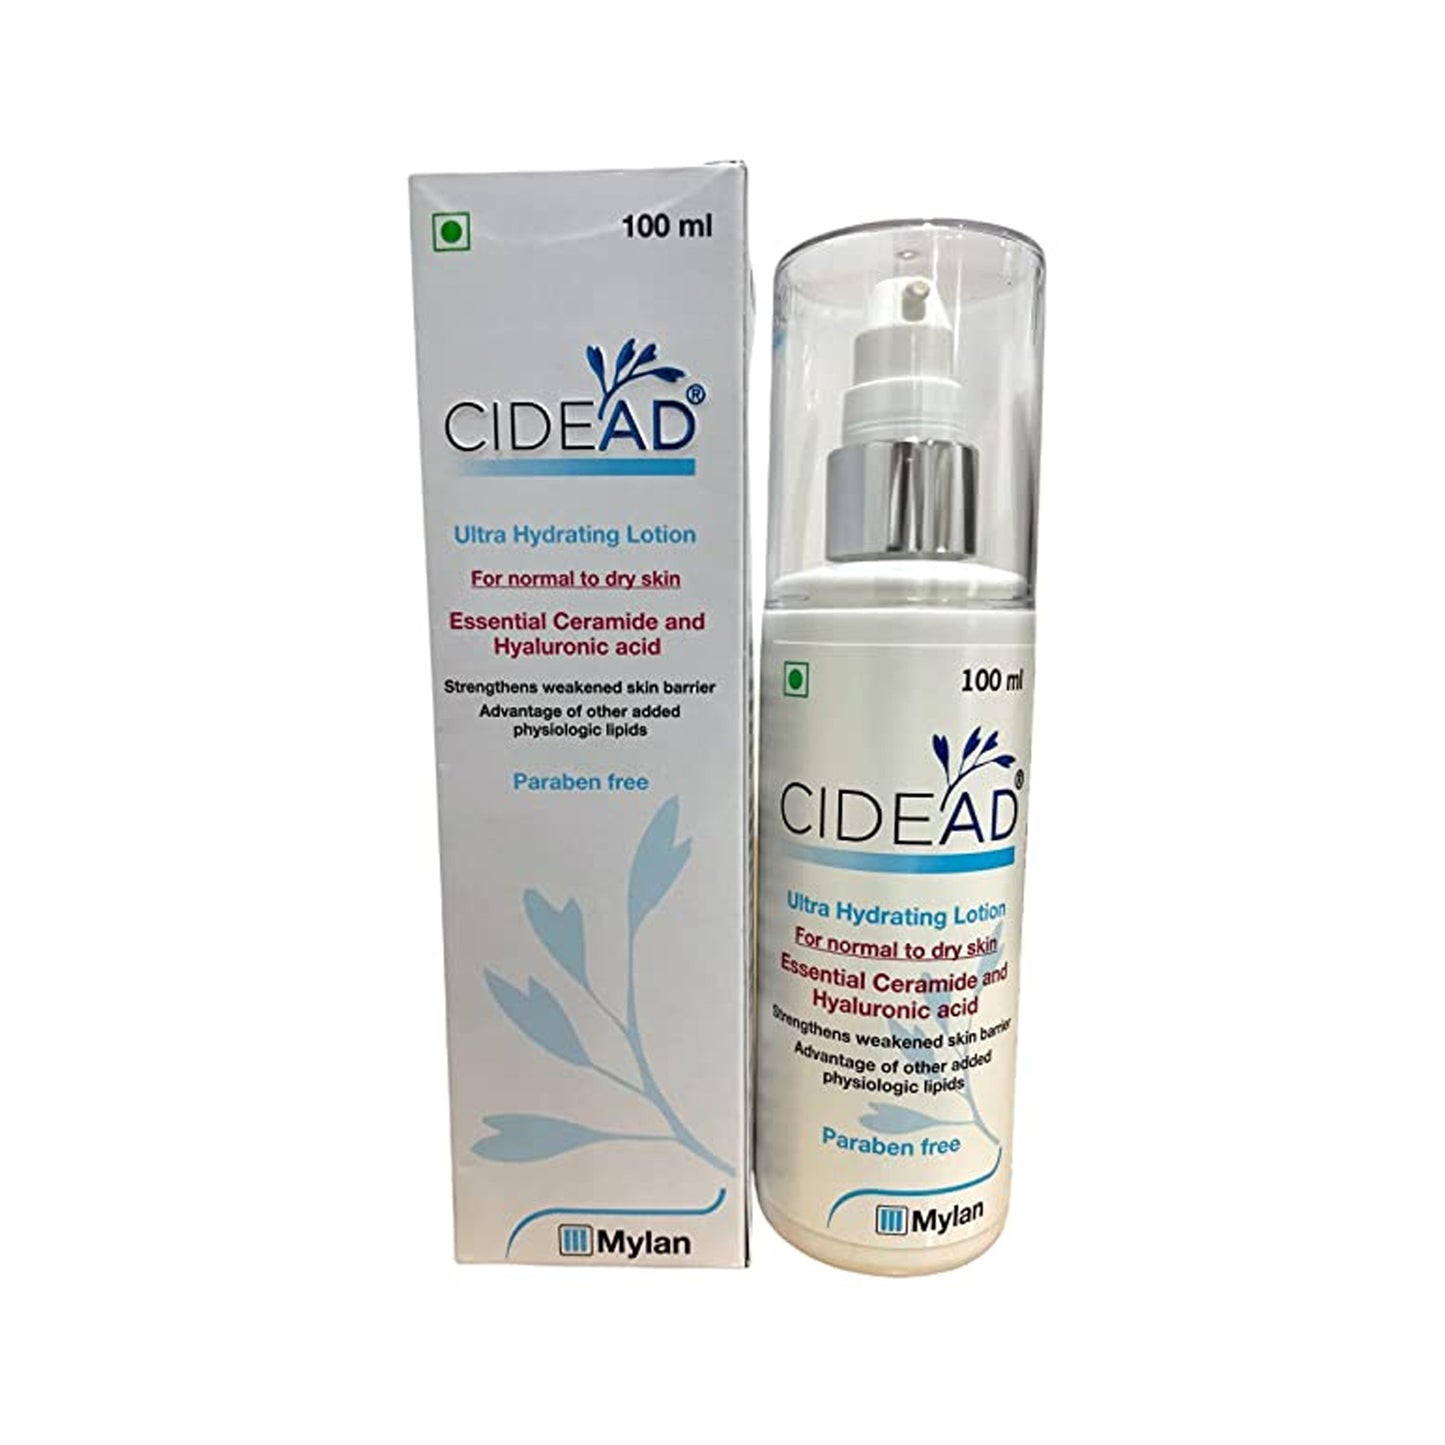 Cidead Ultra Hydrating Lotion, 100ml